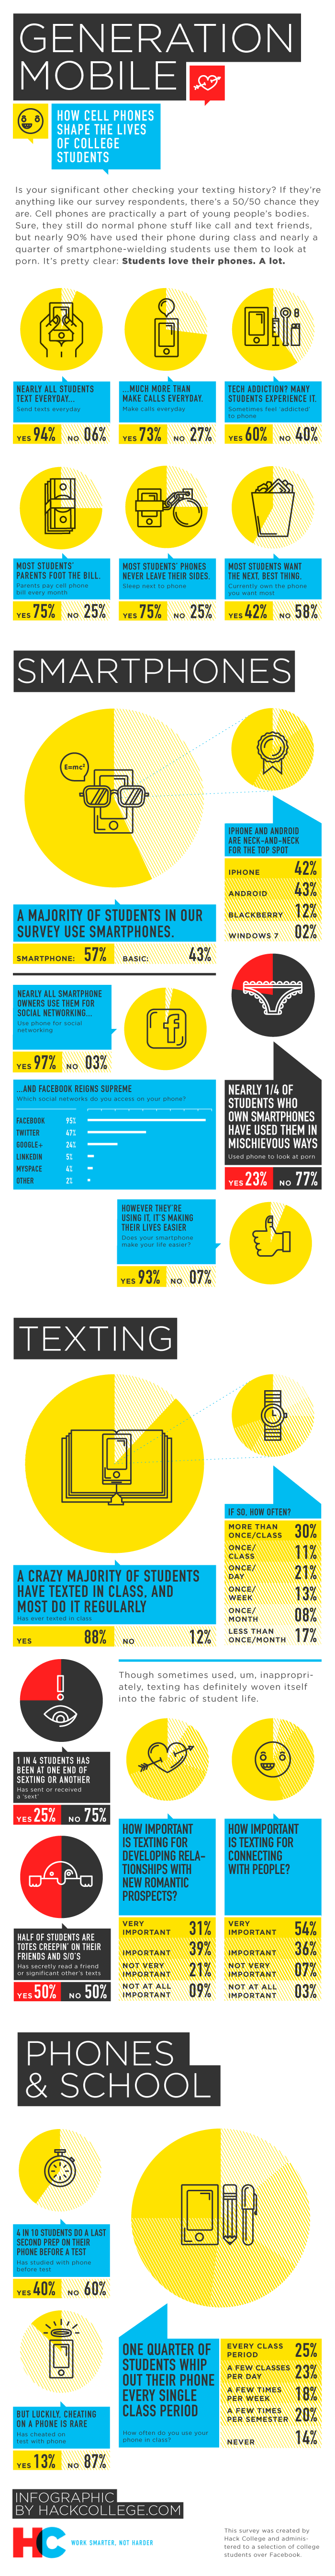 Generation Mobile  Infographic